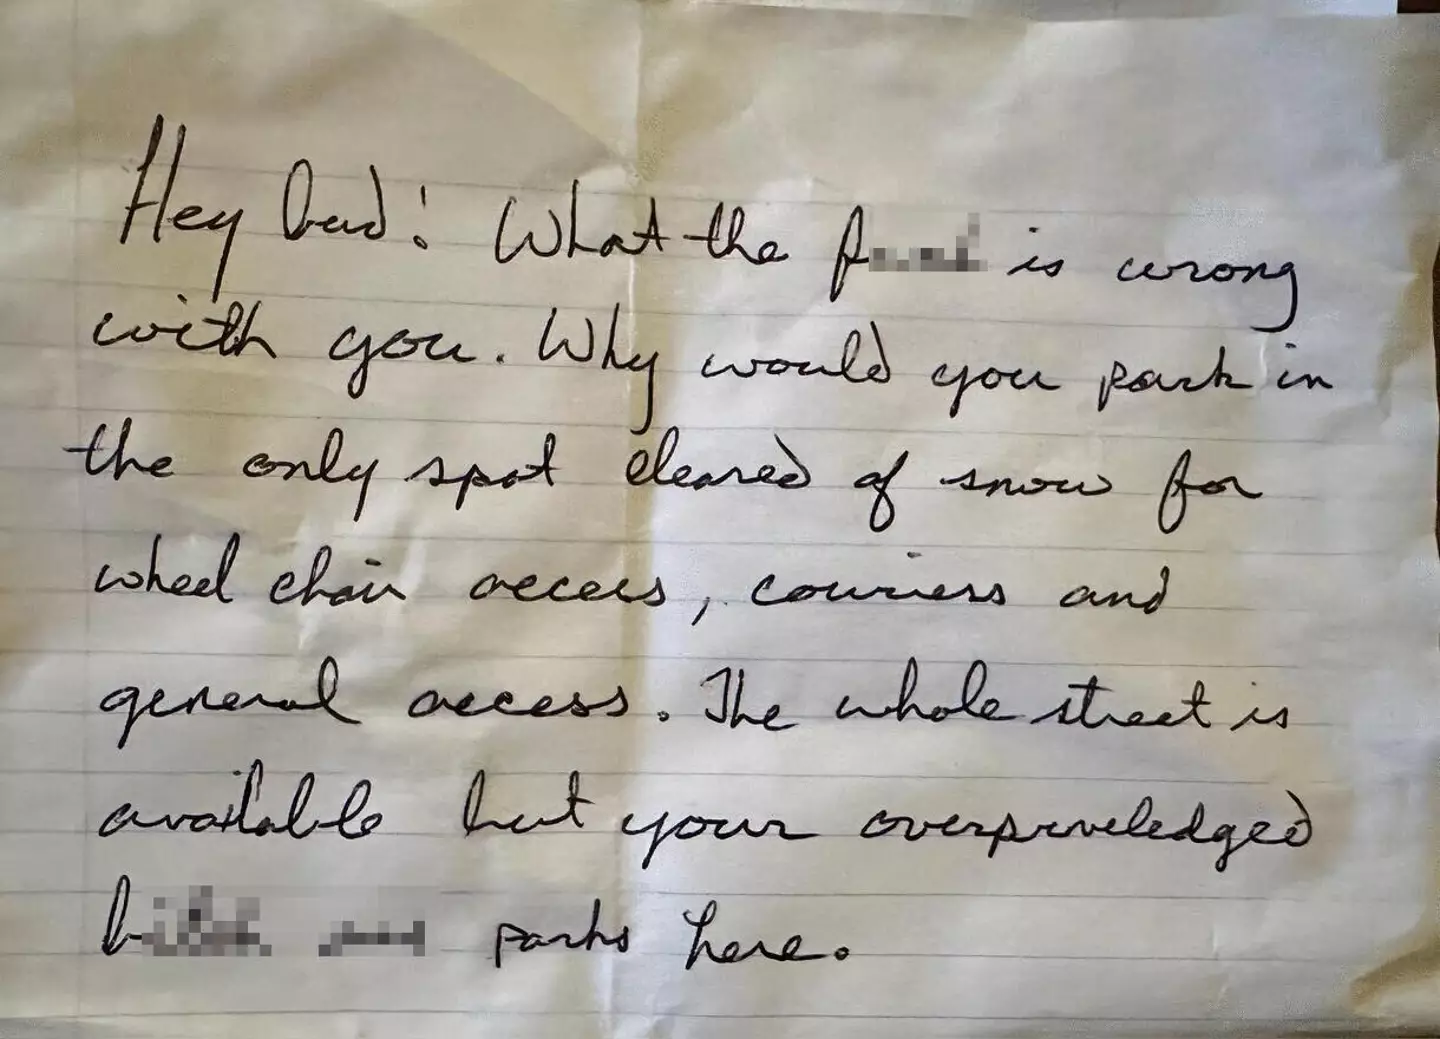 The furious note left on the woman's car.